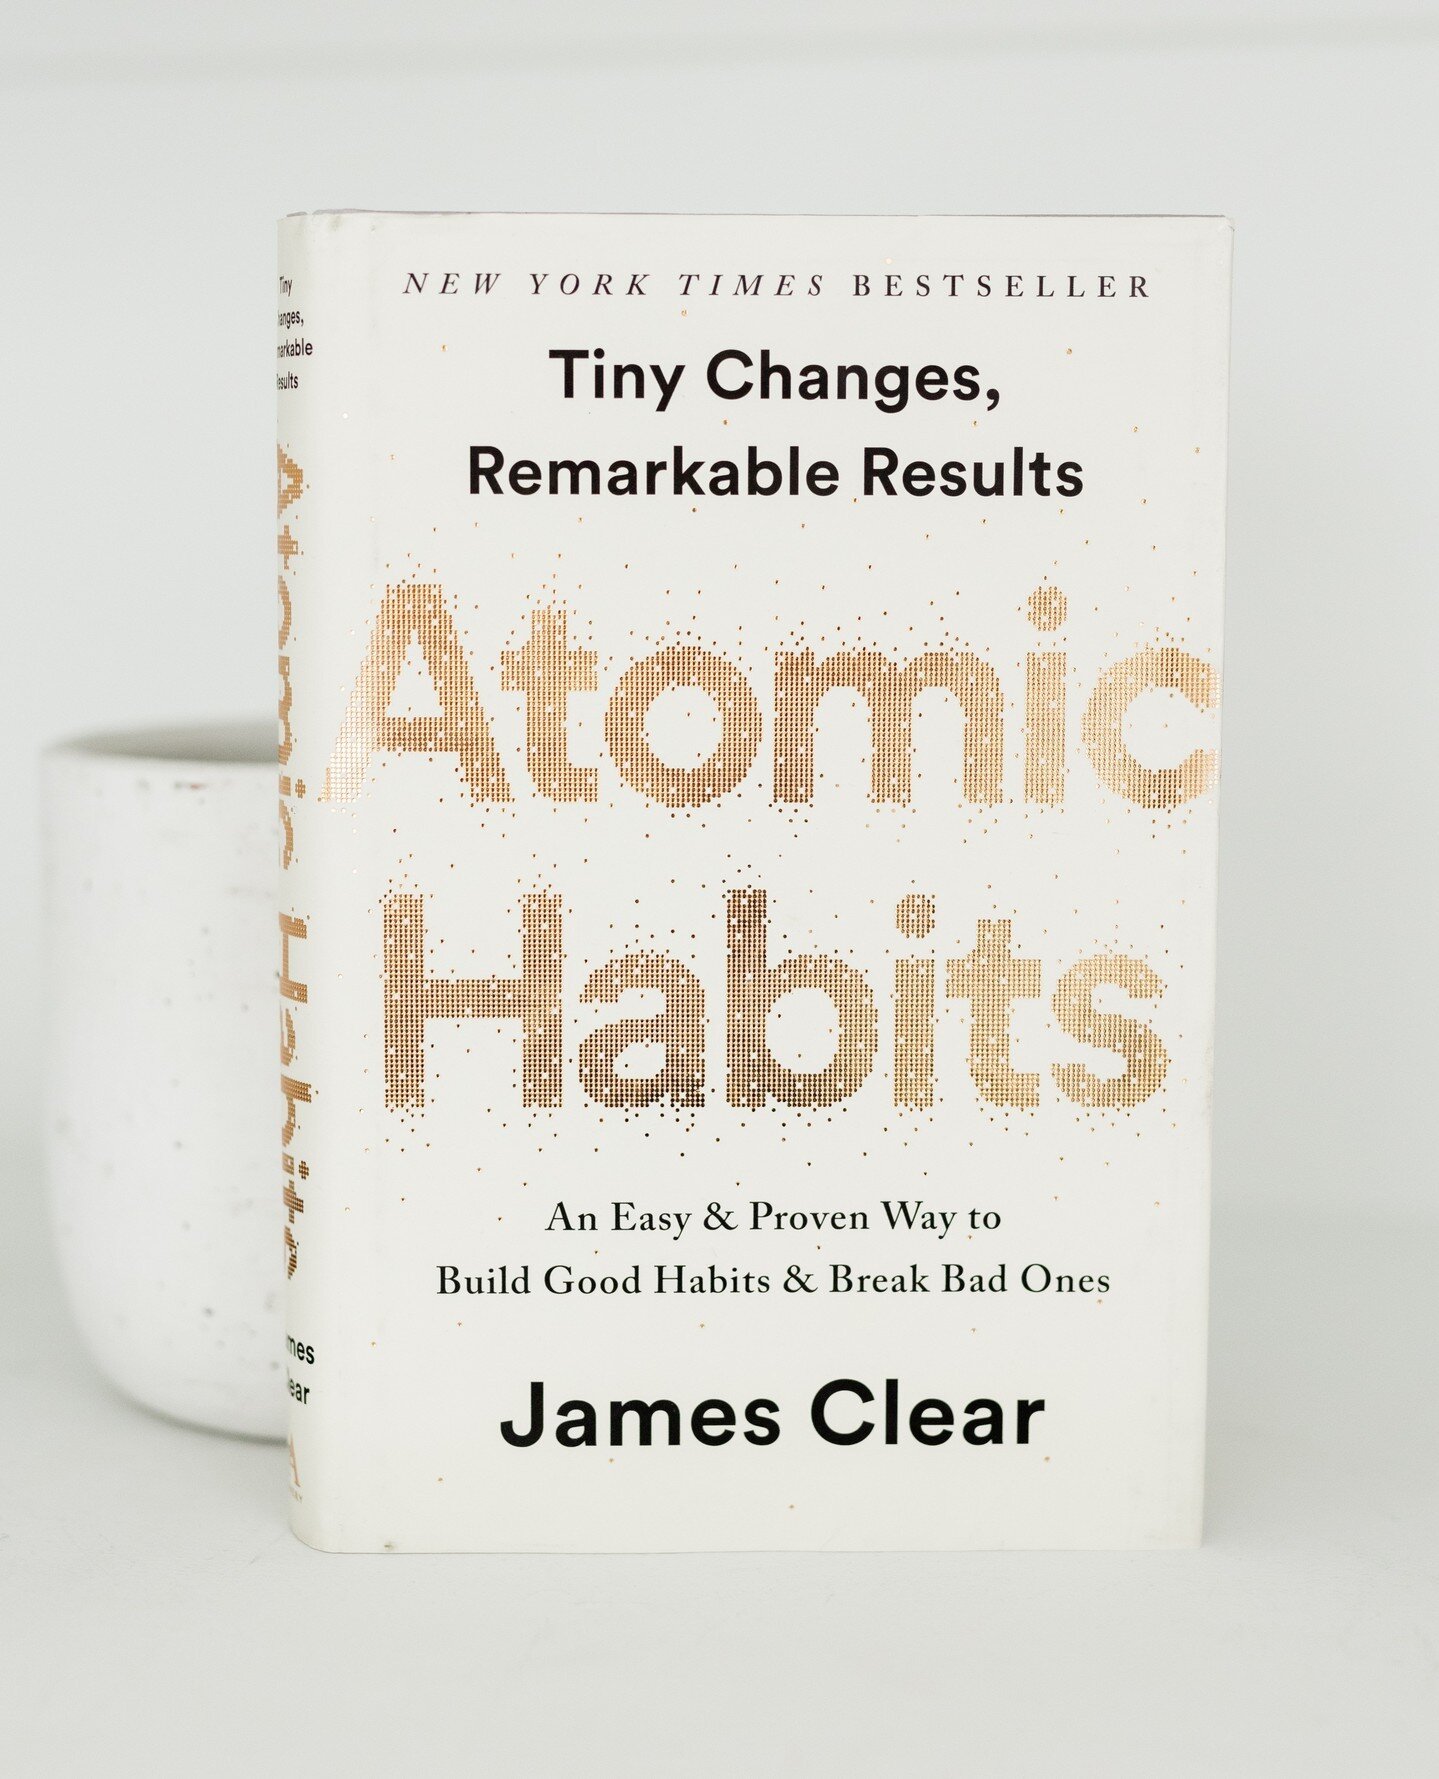 Habits are the building blocks to success.  Your routine, what comes naturally and often automatically, is everything! 

Have you tried habit stacking?  Adding habits you want to begin or improve, after ones that are automatic. 

For example, if you 